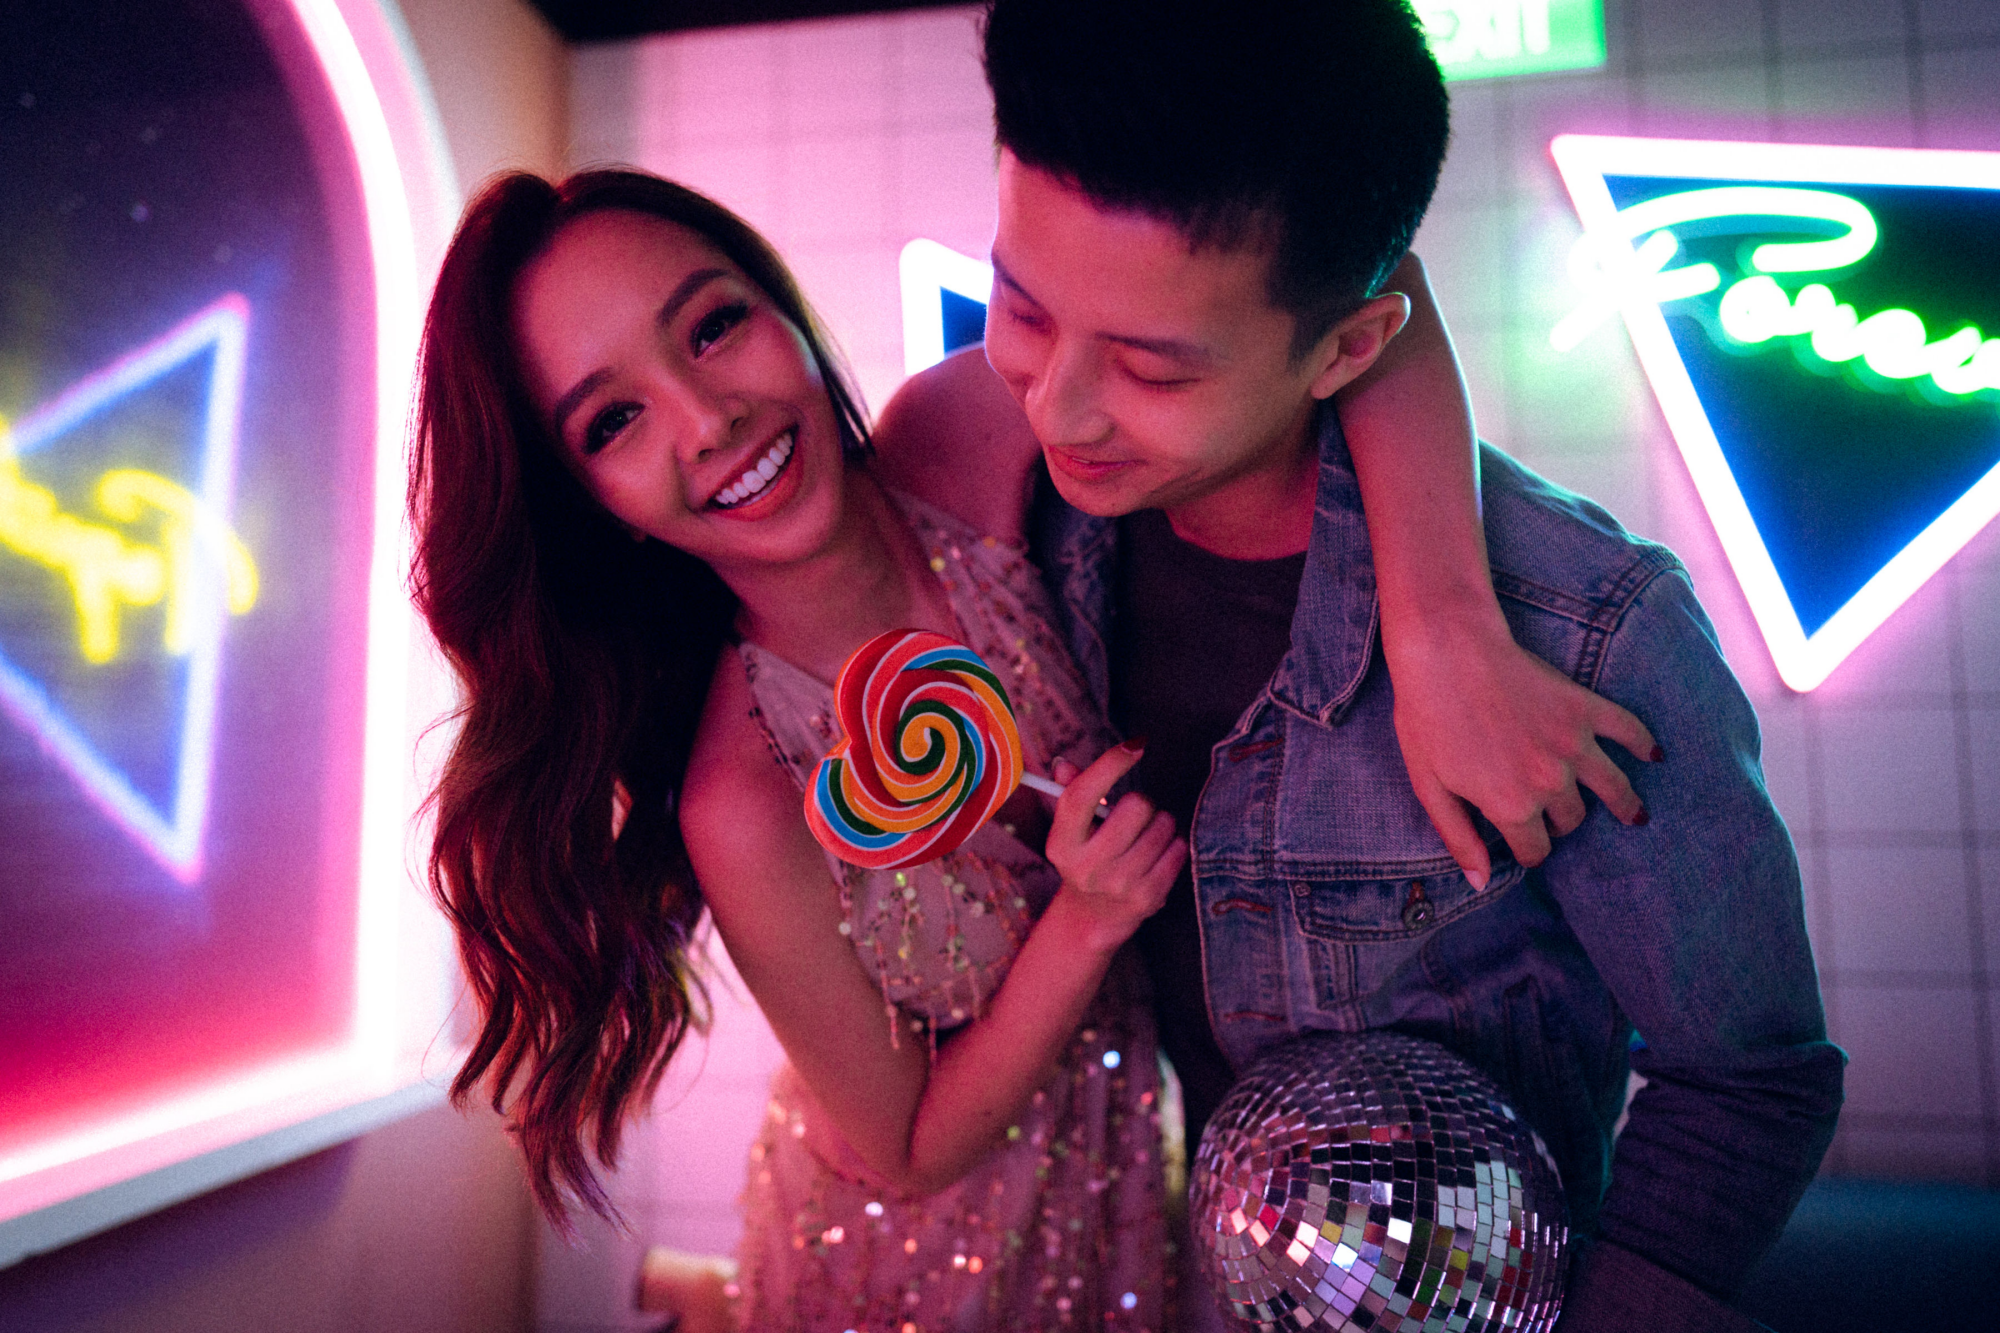 Trippy Disco Themed Casual Couple Photoshoot At A Neon Bar by Samantha on OneThreeOneFour 22